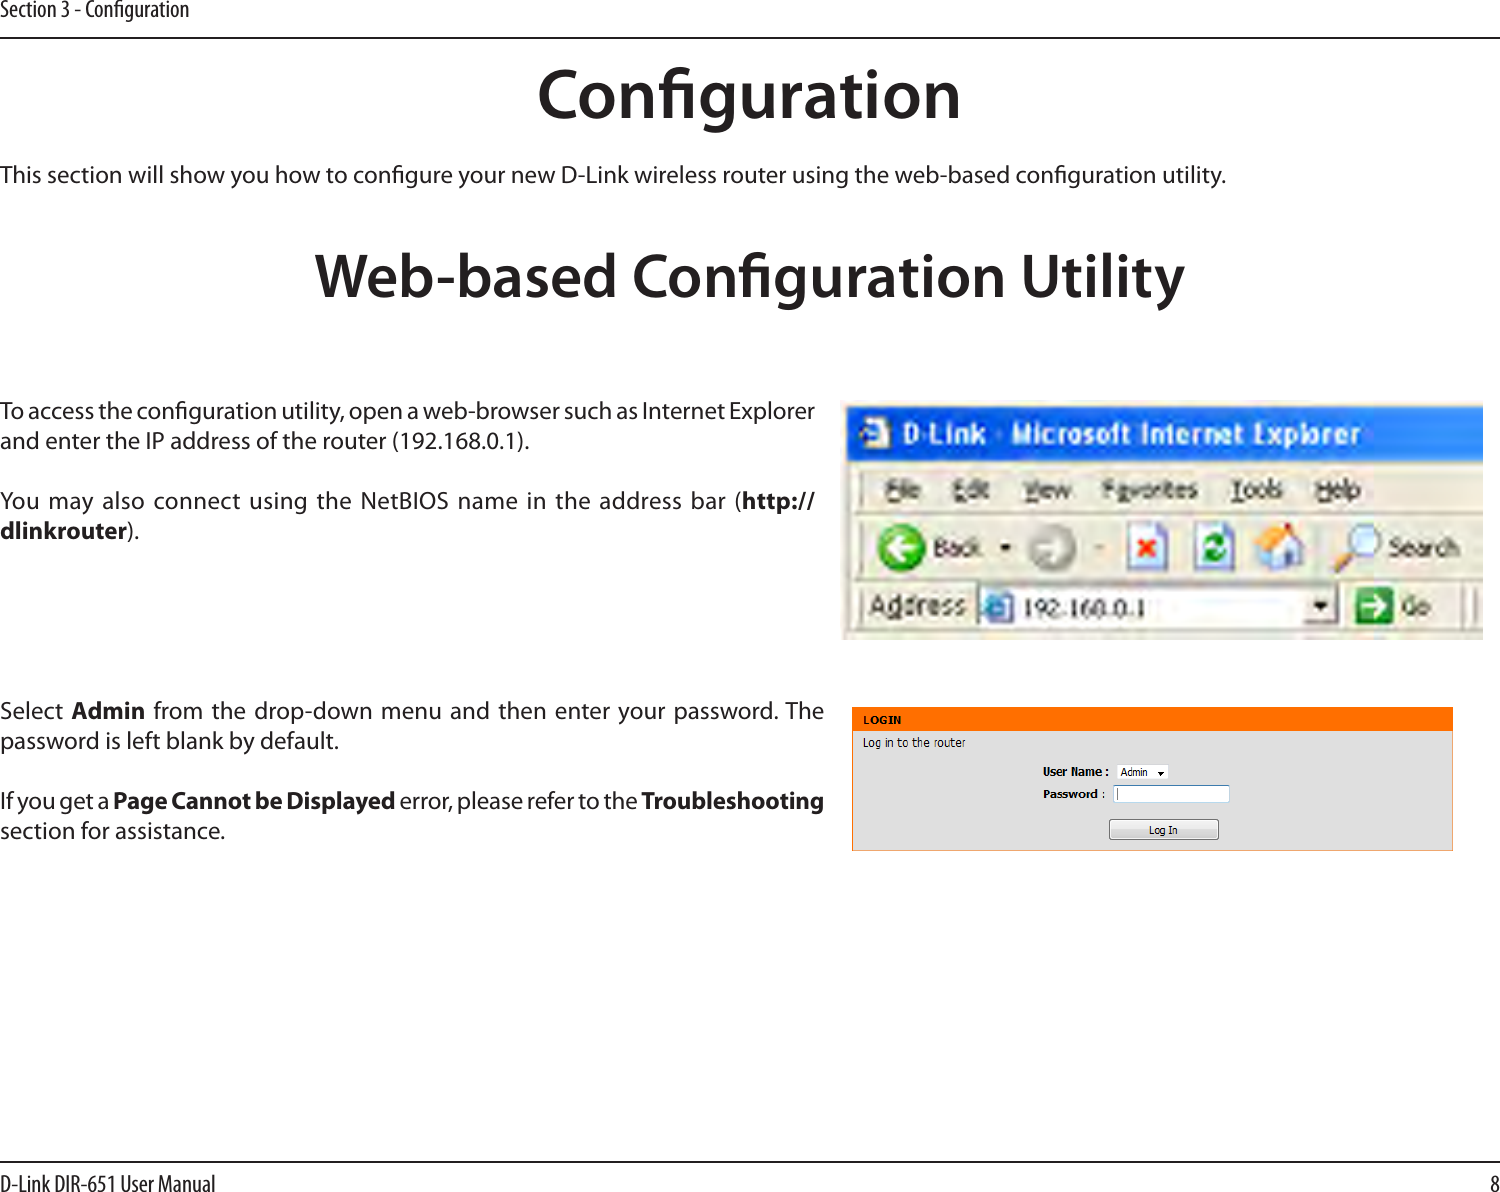 8D-Link DIR-651 User ManualSection 3 - CongurationCongurationThis section will show you how to congure your new D-Link wireless router using the web-based conguration utility.Web-based Conguration UtilityTo access the conguration utility, open a web-browser such as Internet Explorer and enter the IP address of the router (192.168.0.1).You  may also  connect using  the NetBIOS name in the  address bar  (http://dlinkrouter).Select  Admin from the drop-down menu  and then enter your password. The password is left blank by default.If you get a Page Cannot be Displayed error, please refer to the Troubleshooting section for assistance.